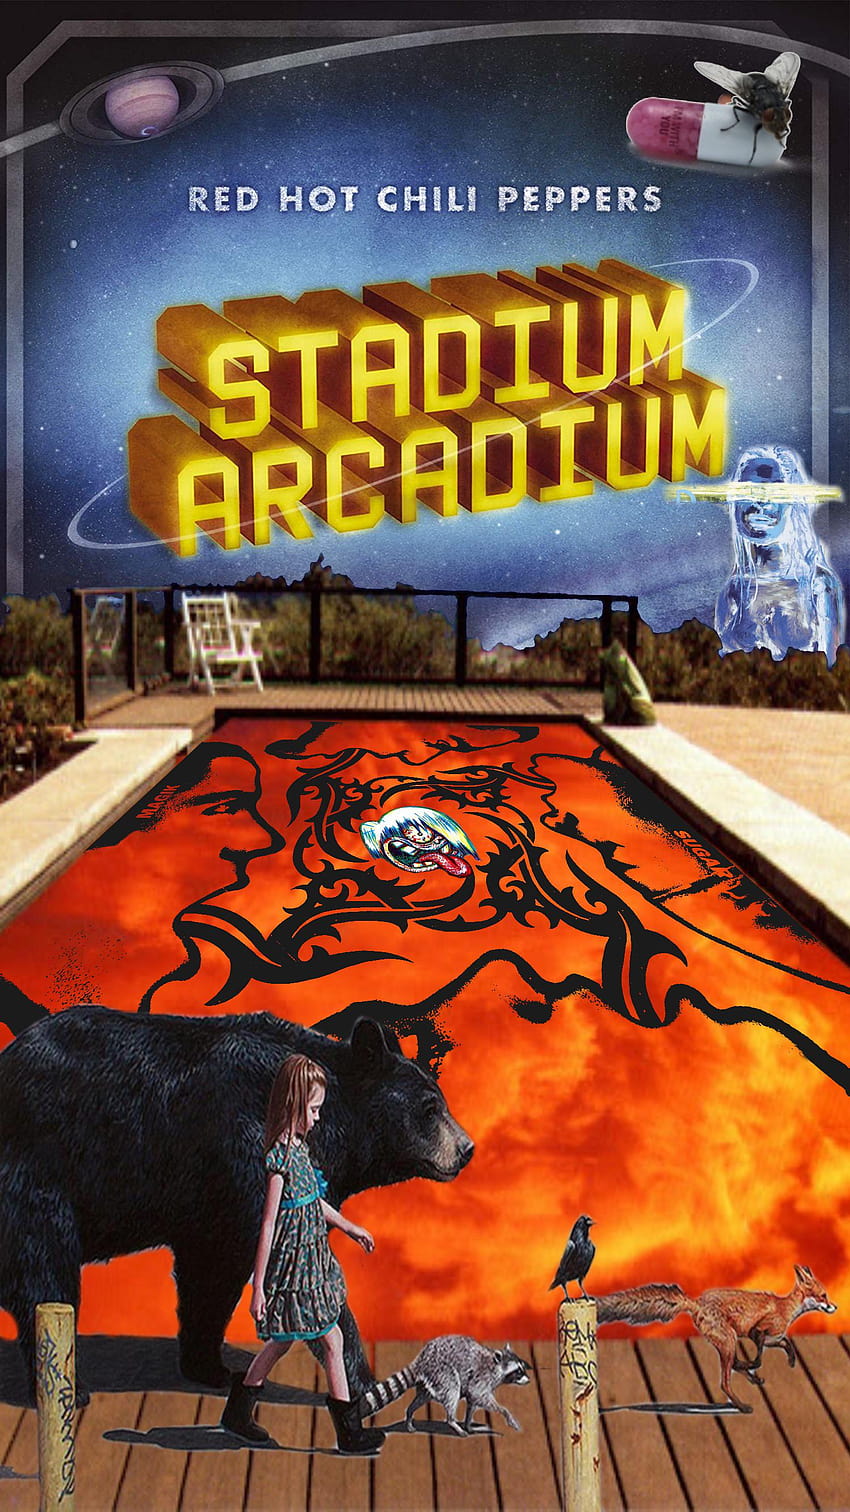 I made a phone shouting out 7 different RHCP albums : r/RedHotChiliPeppers, stadium arcadium HD phone wallpaper